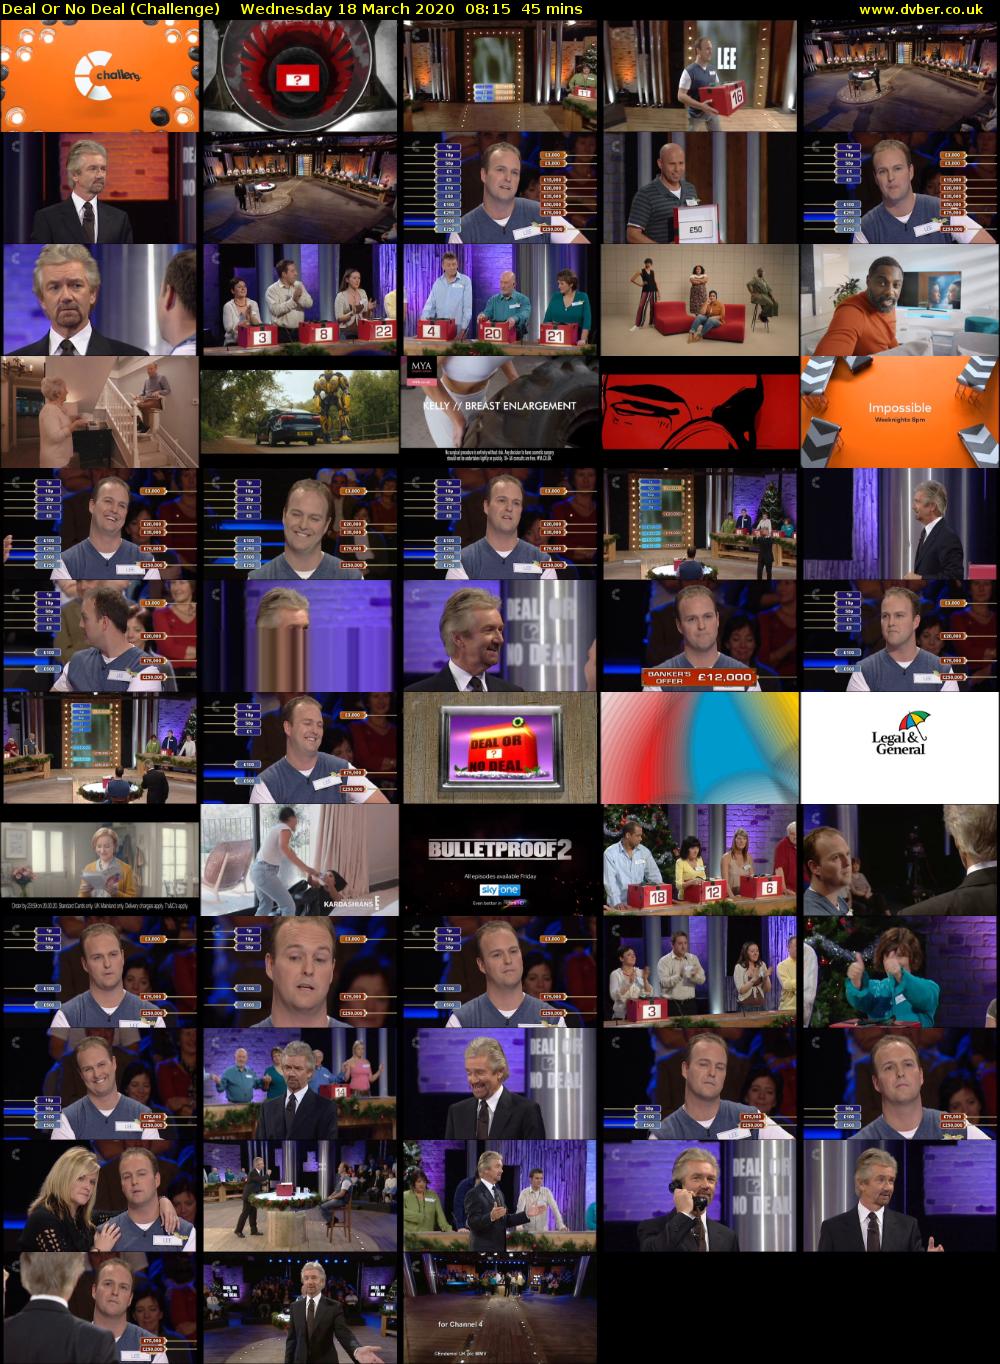 Deal Or No Deal (Challenge) Wednesday 18 March 2020 08:15 - 09:00